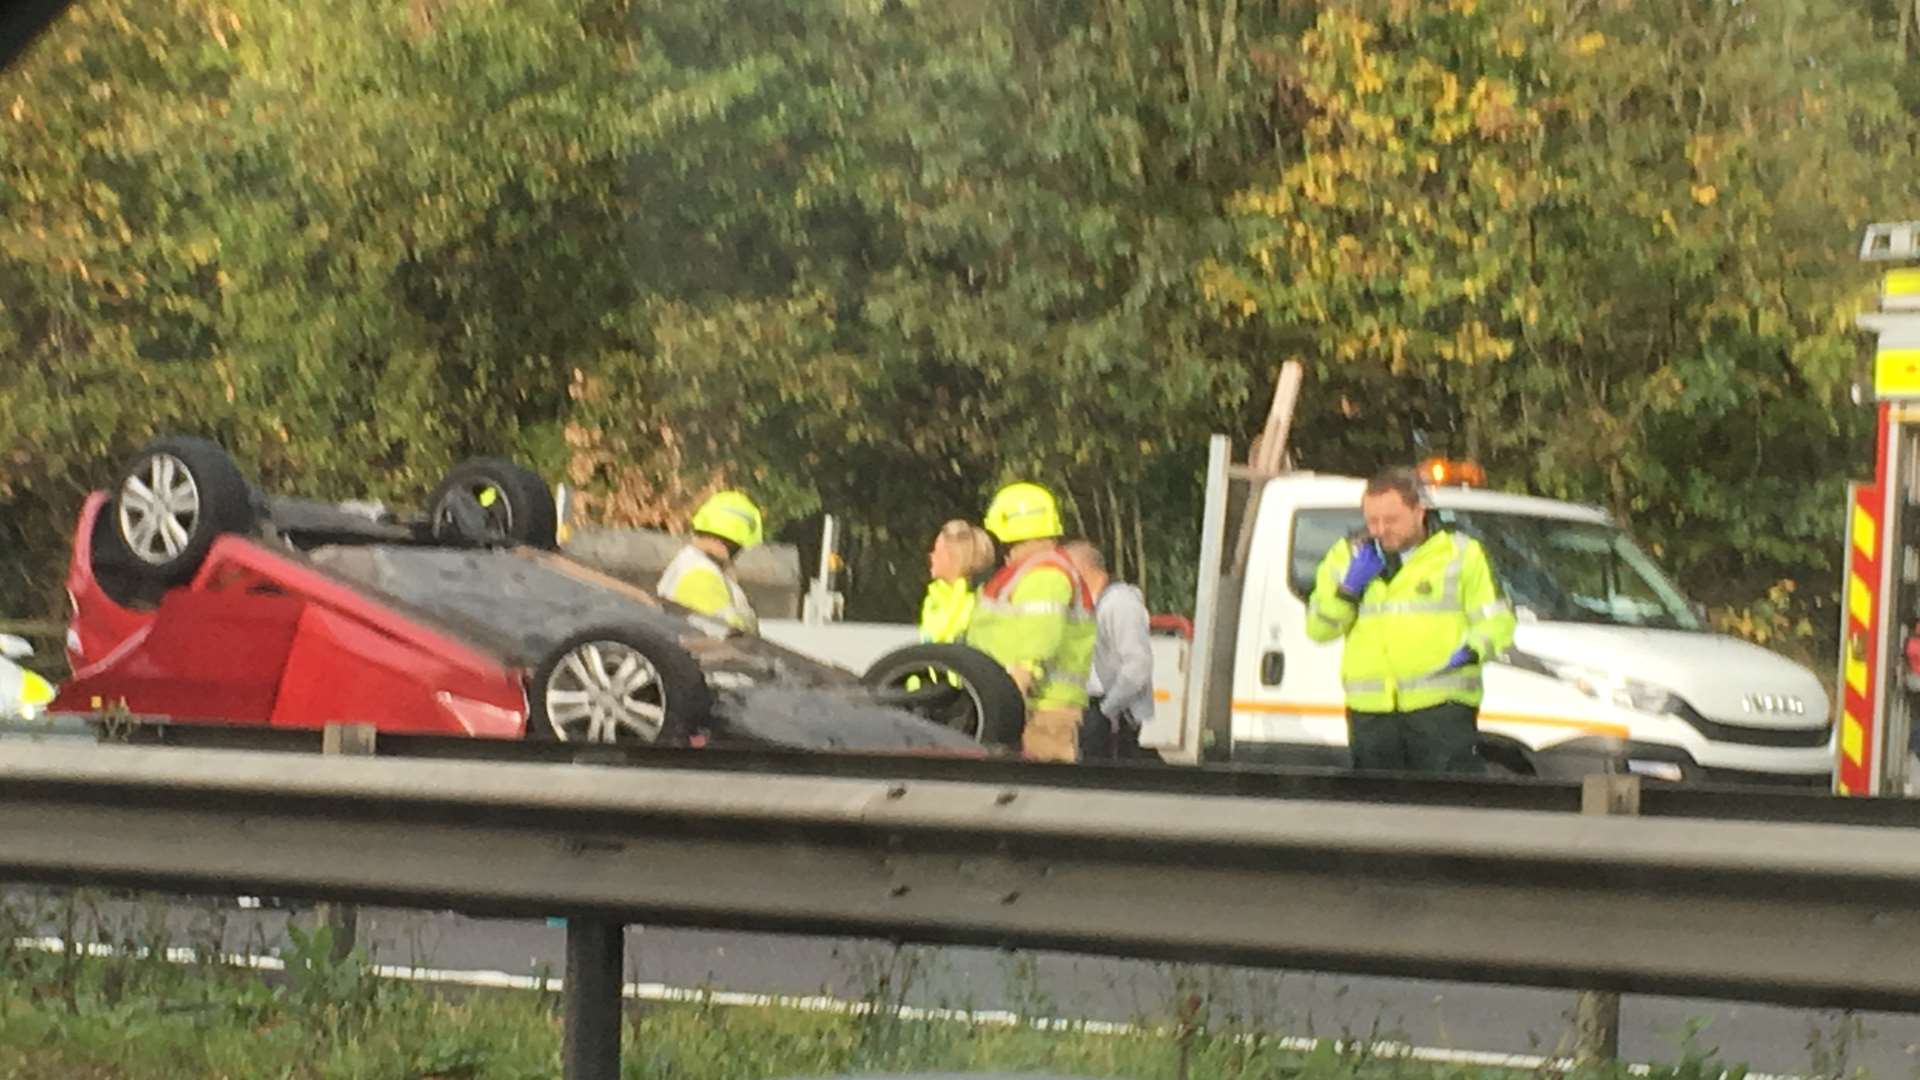 The car ended up on its roof.